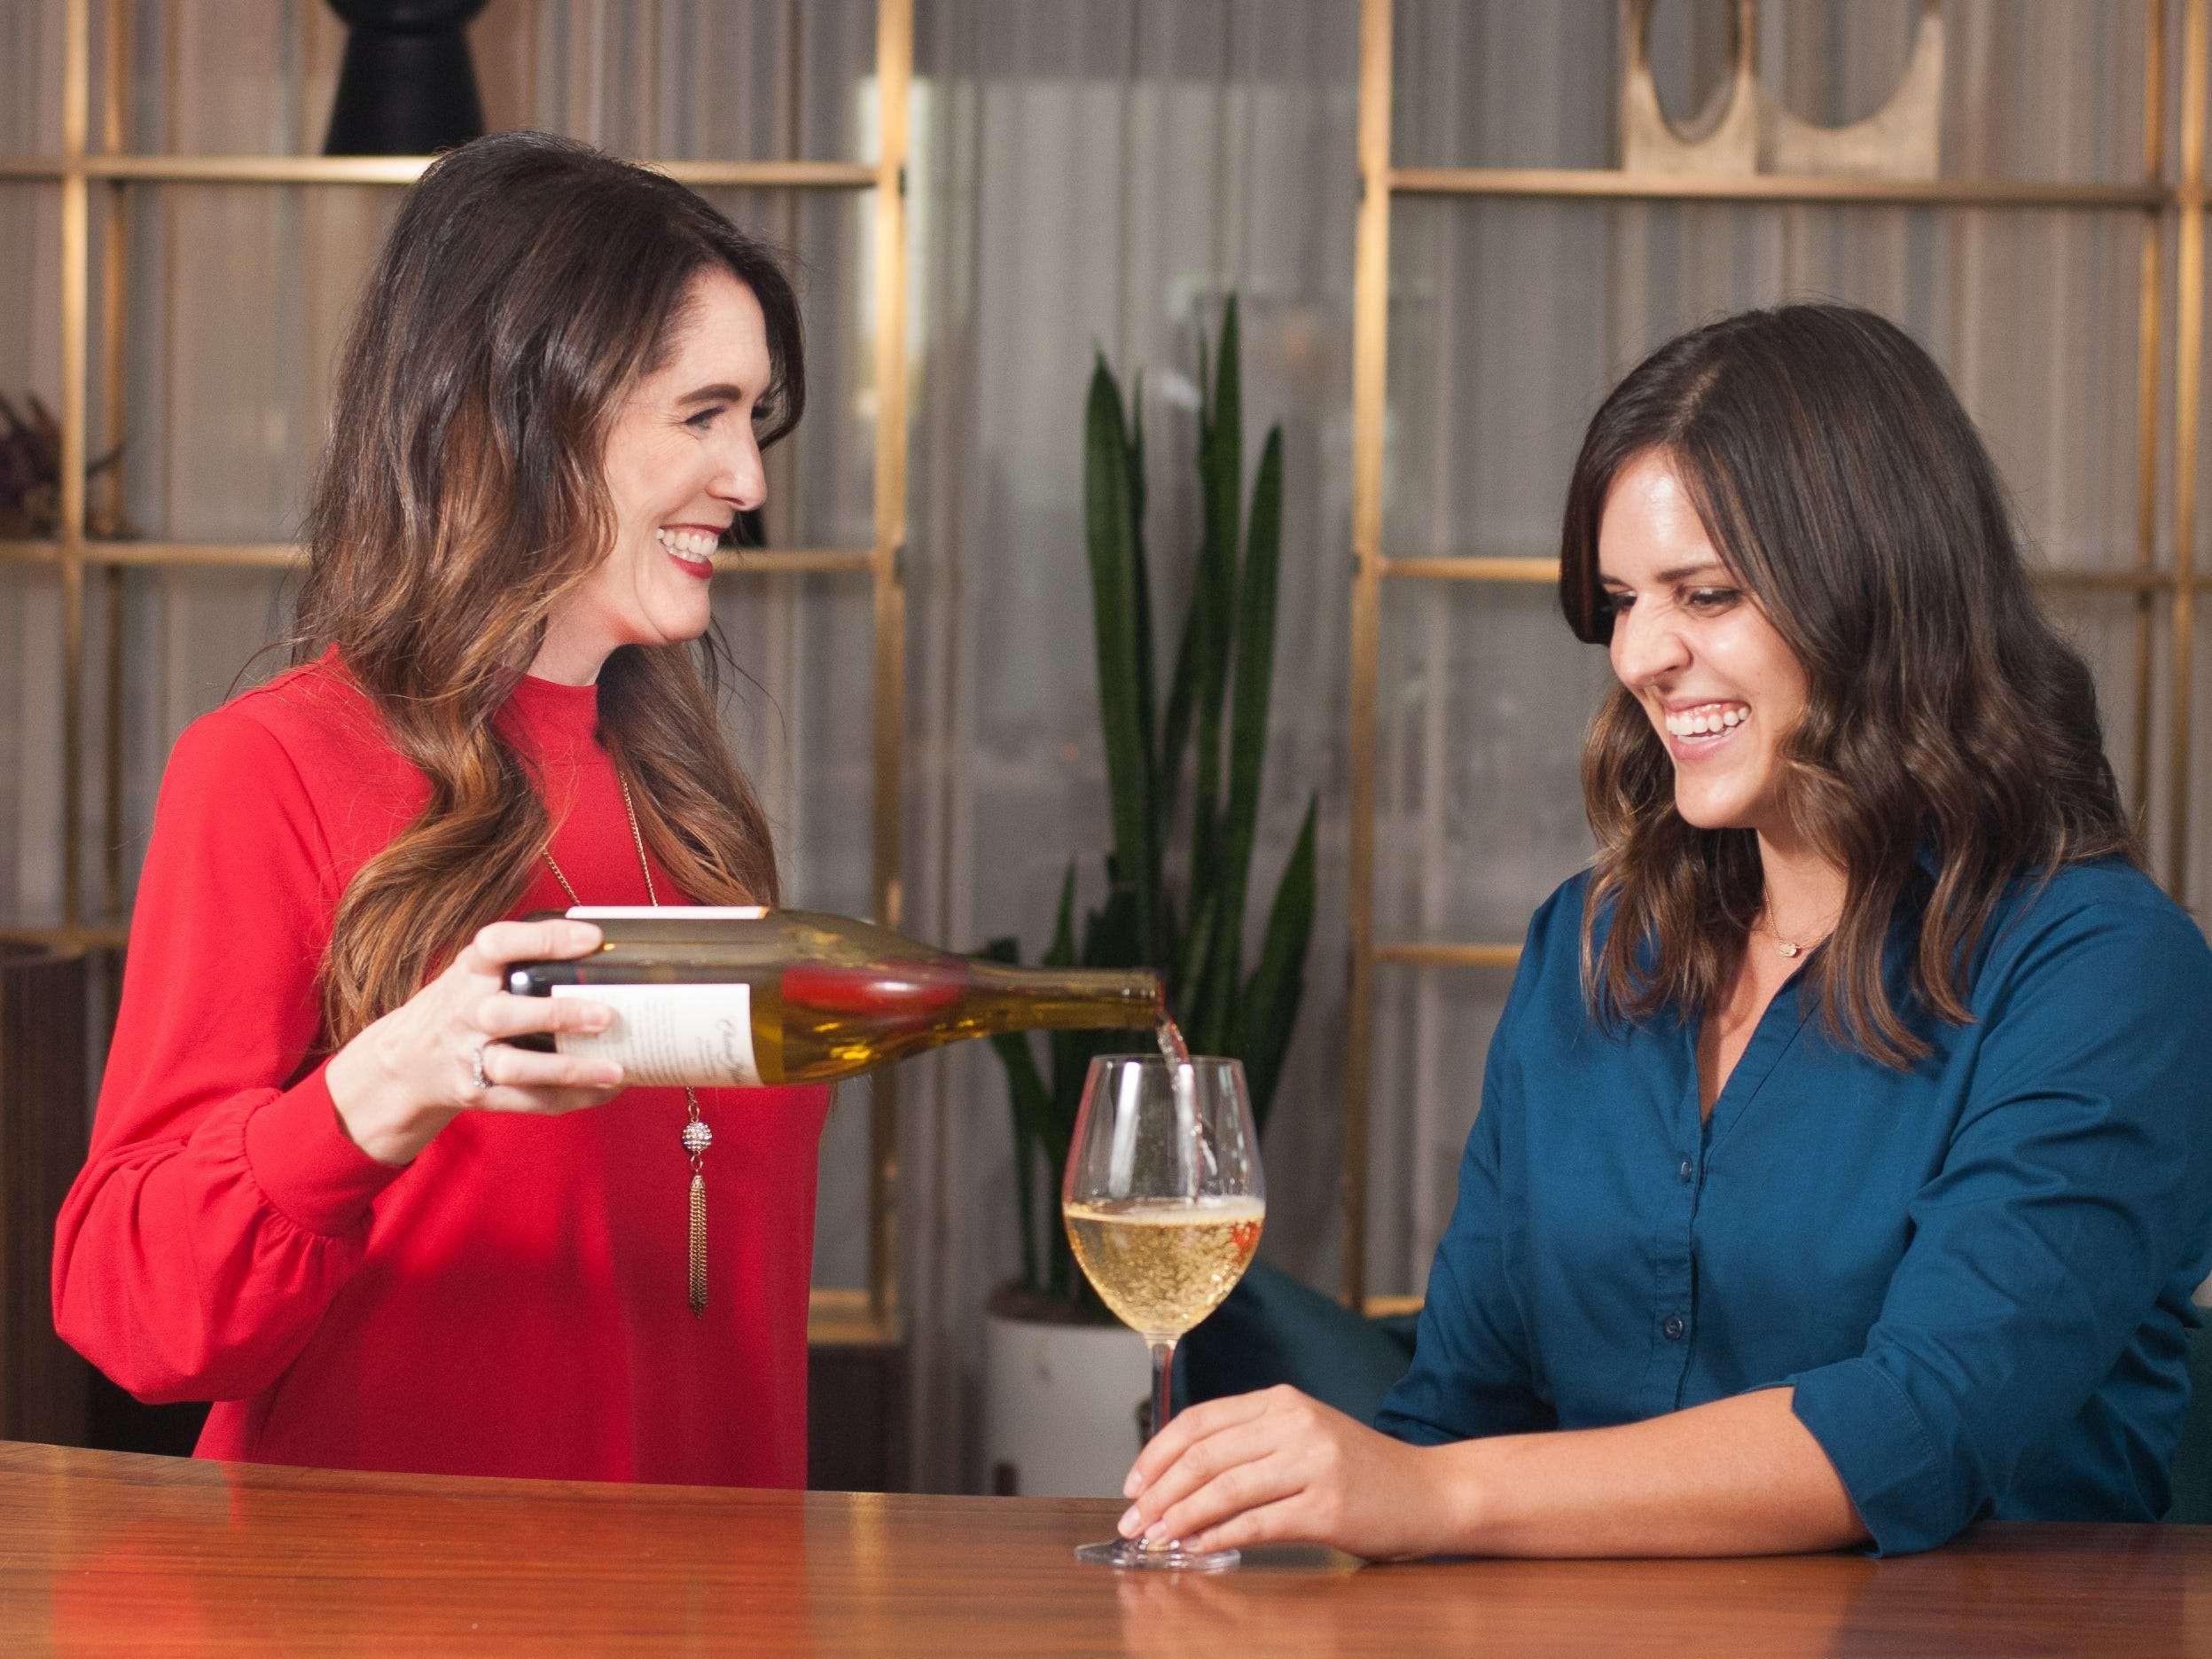 I'm a wine consultant who creates custom tastings and dinners for private clients. Here's how I transitioned from writing about wine to running my own business.